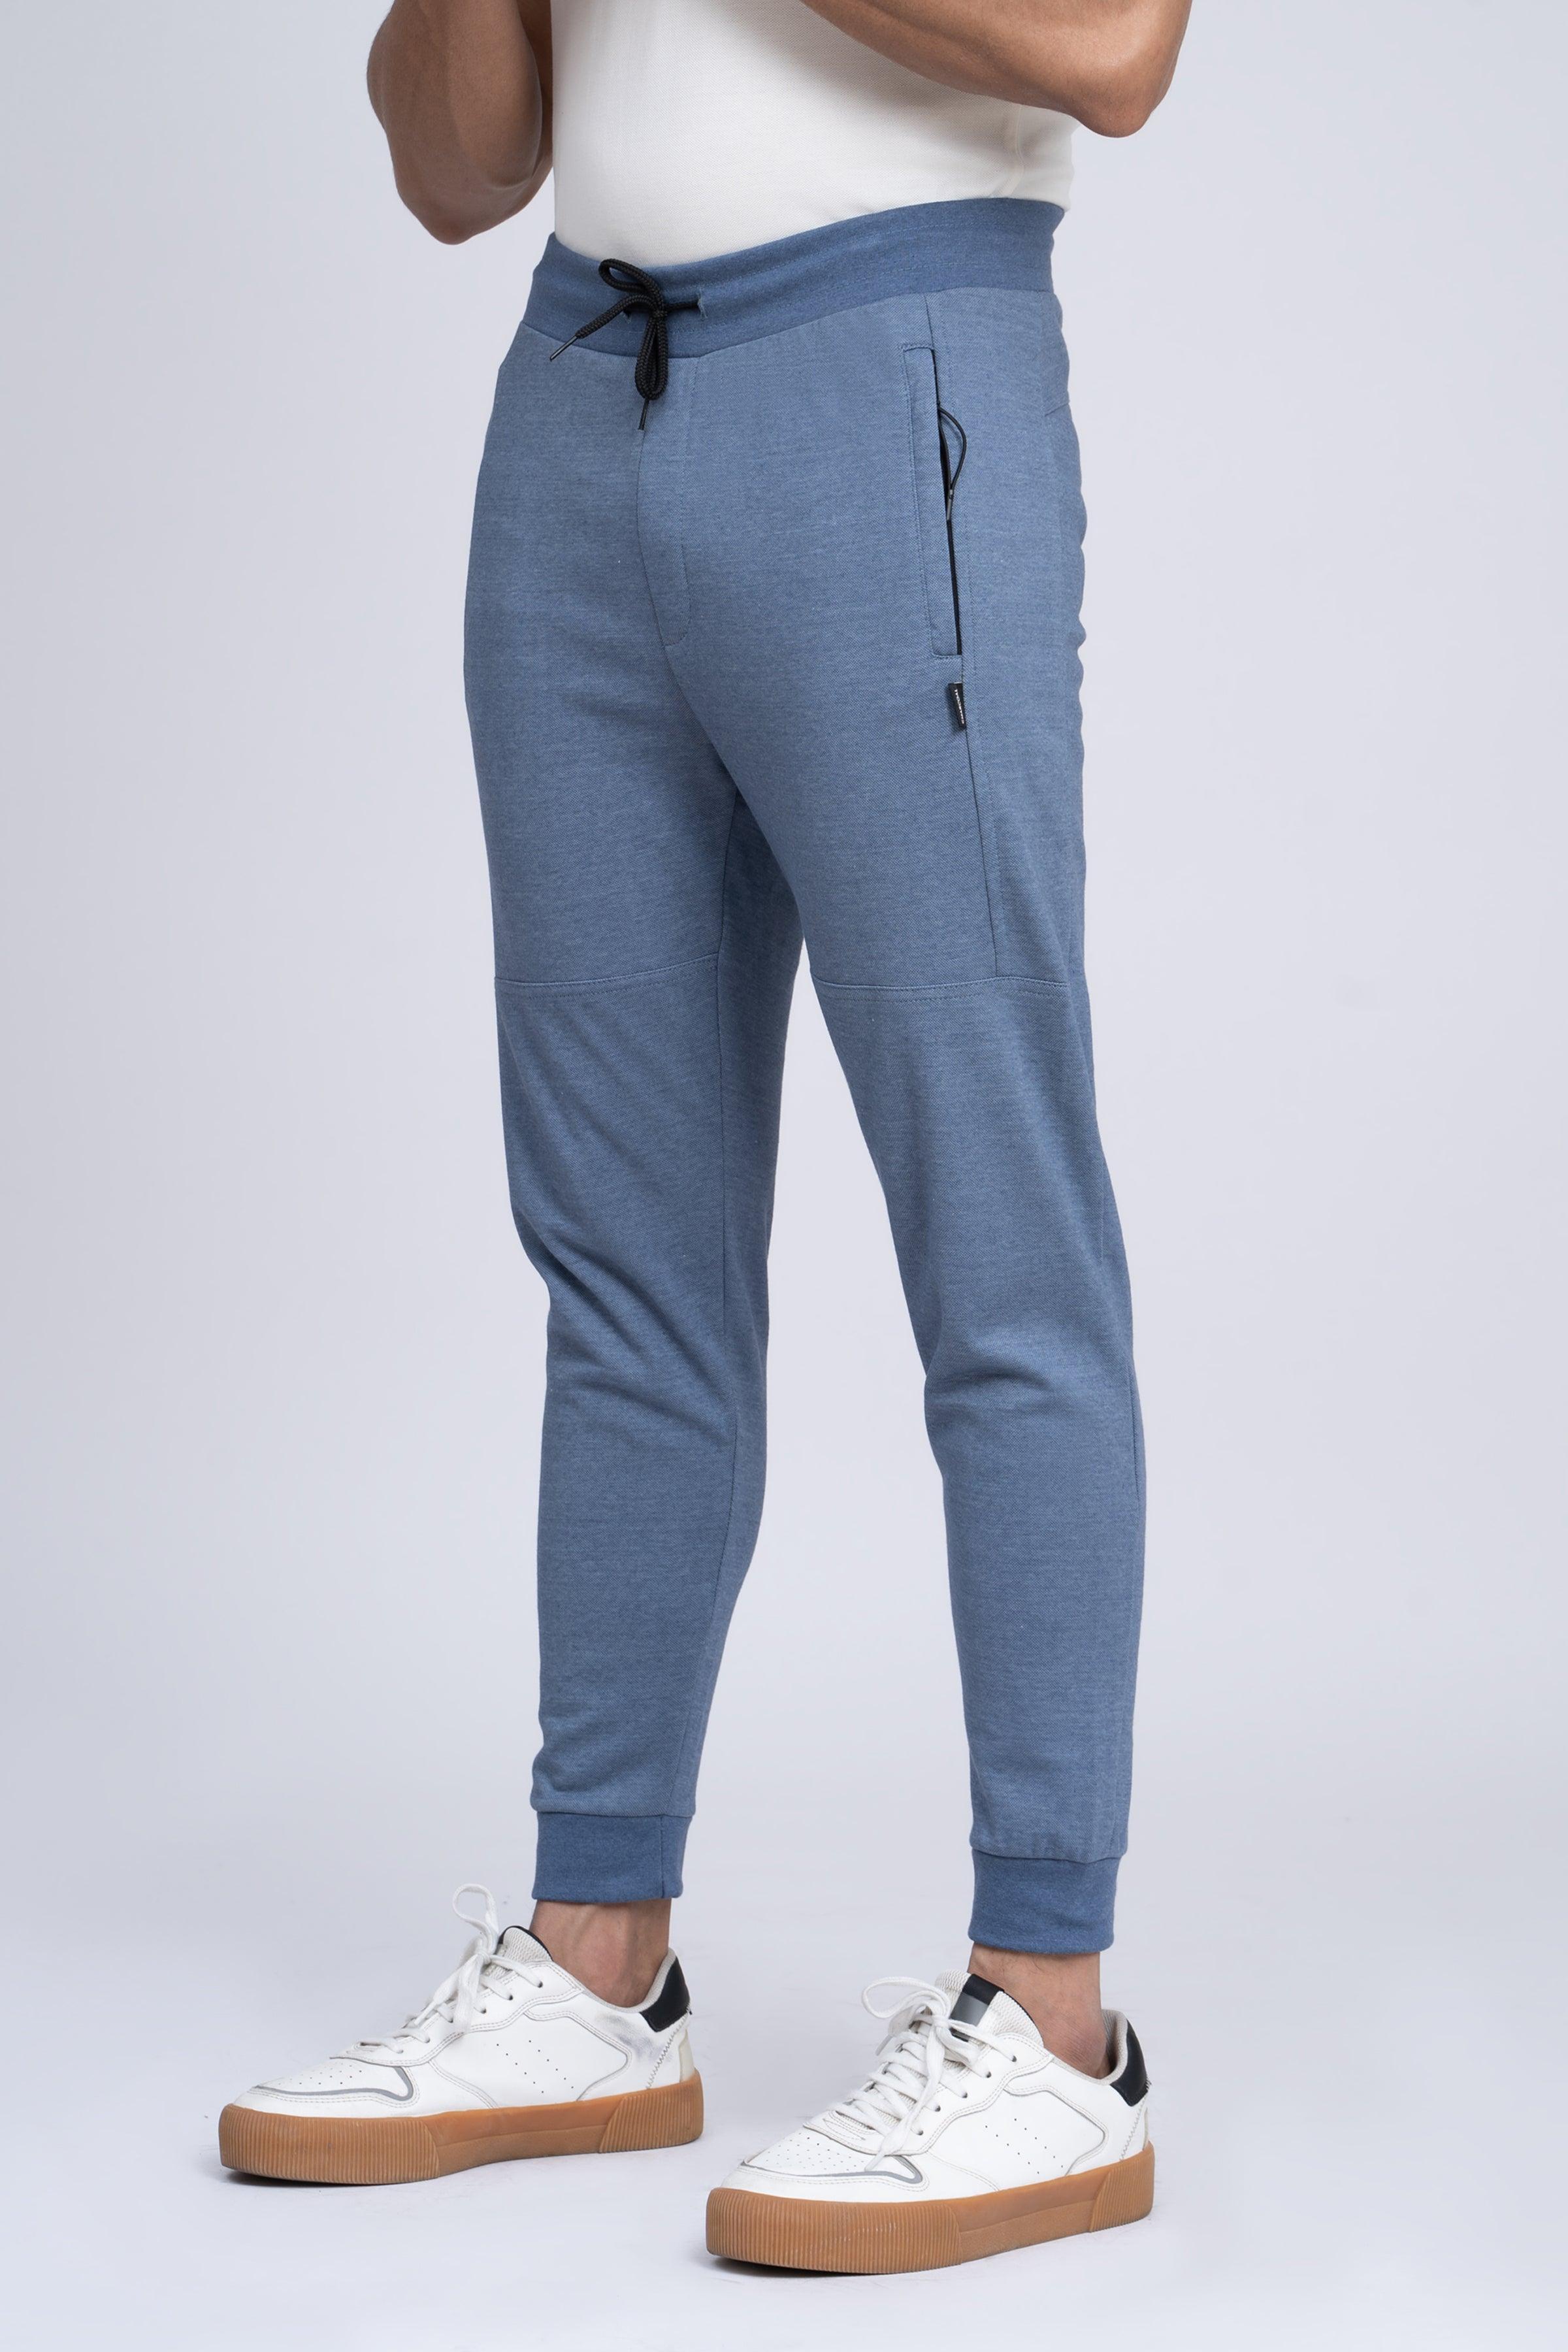 PIQUE INTERLOCK TROUSER BLUE at Charcoal Clothing